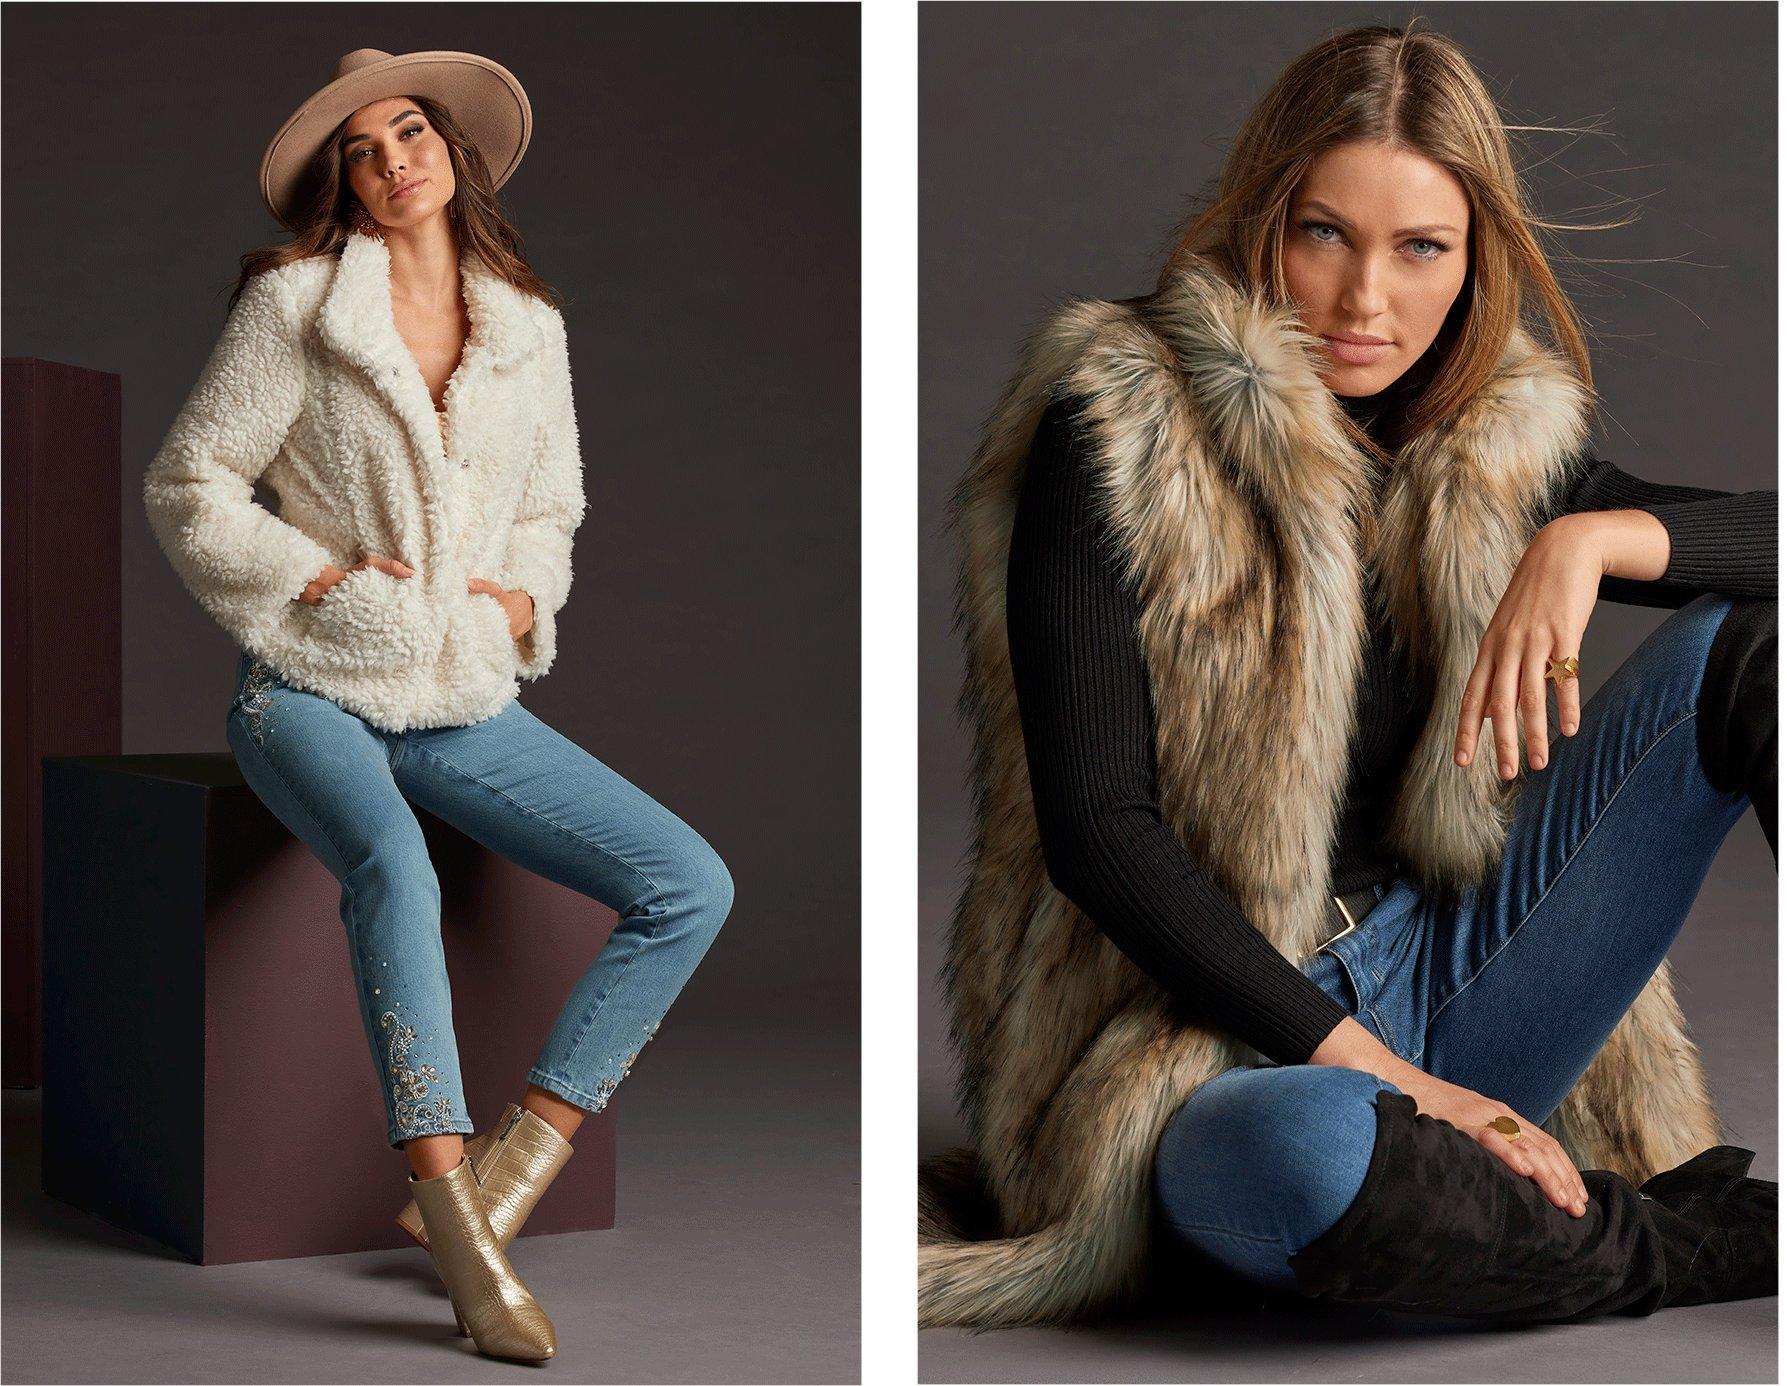 left model wearing an off-white short teddy coat, embellished light-wash ankle jeans, gold pointed toe croc booties, and a taupe felt hat. right model wearing a long faux-fur vest, black ribbed turtleneck sweater, jeans, and black over-the-knee boots.